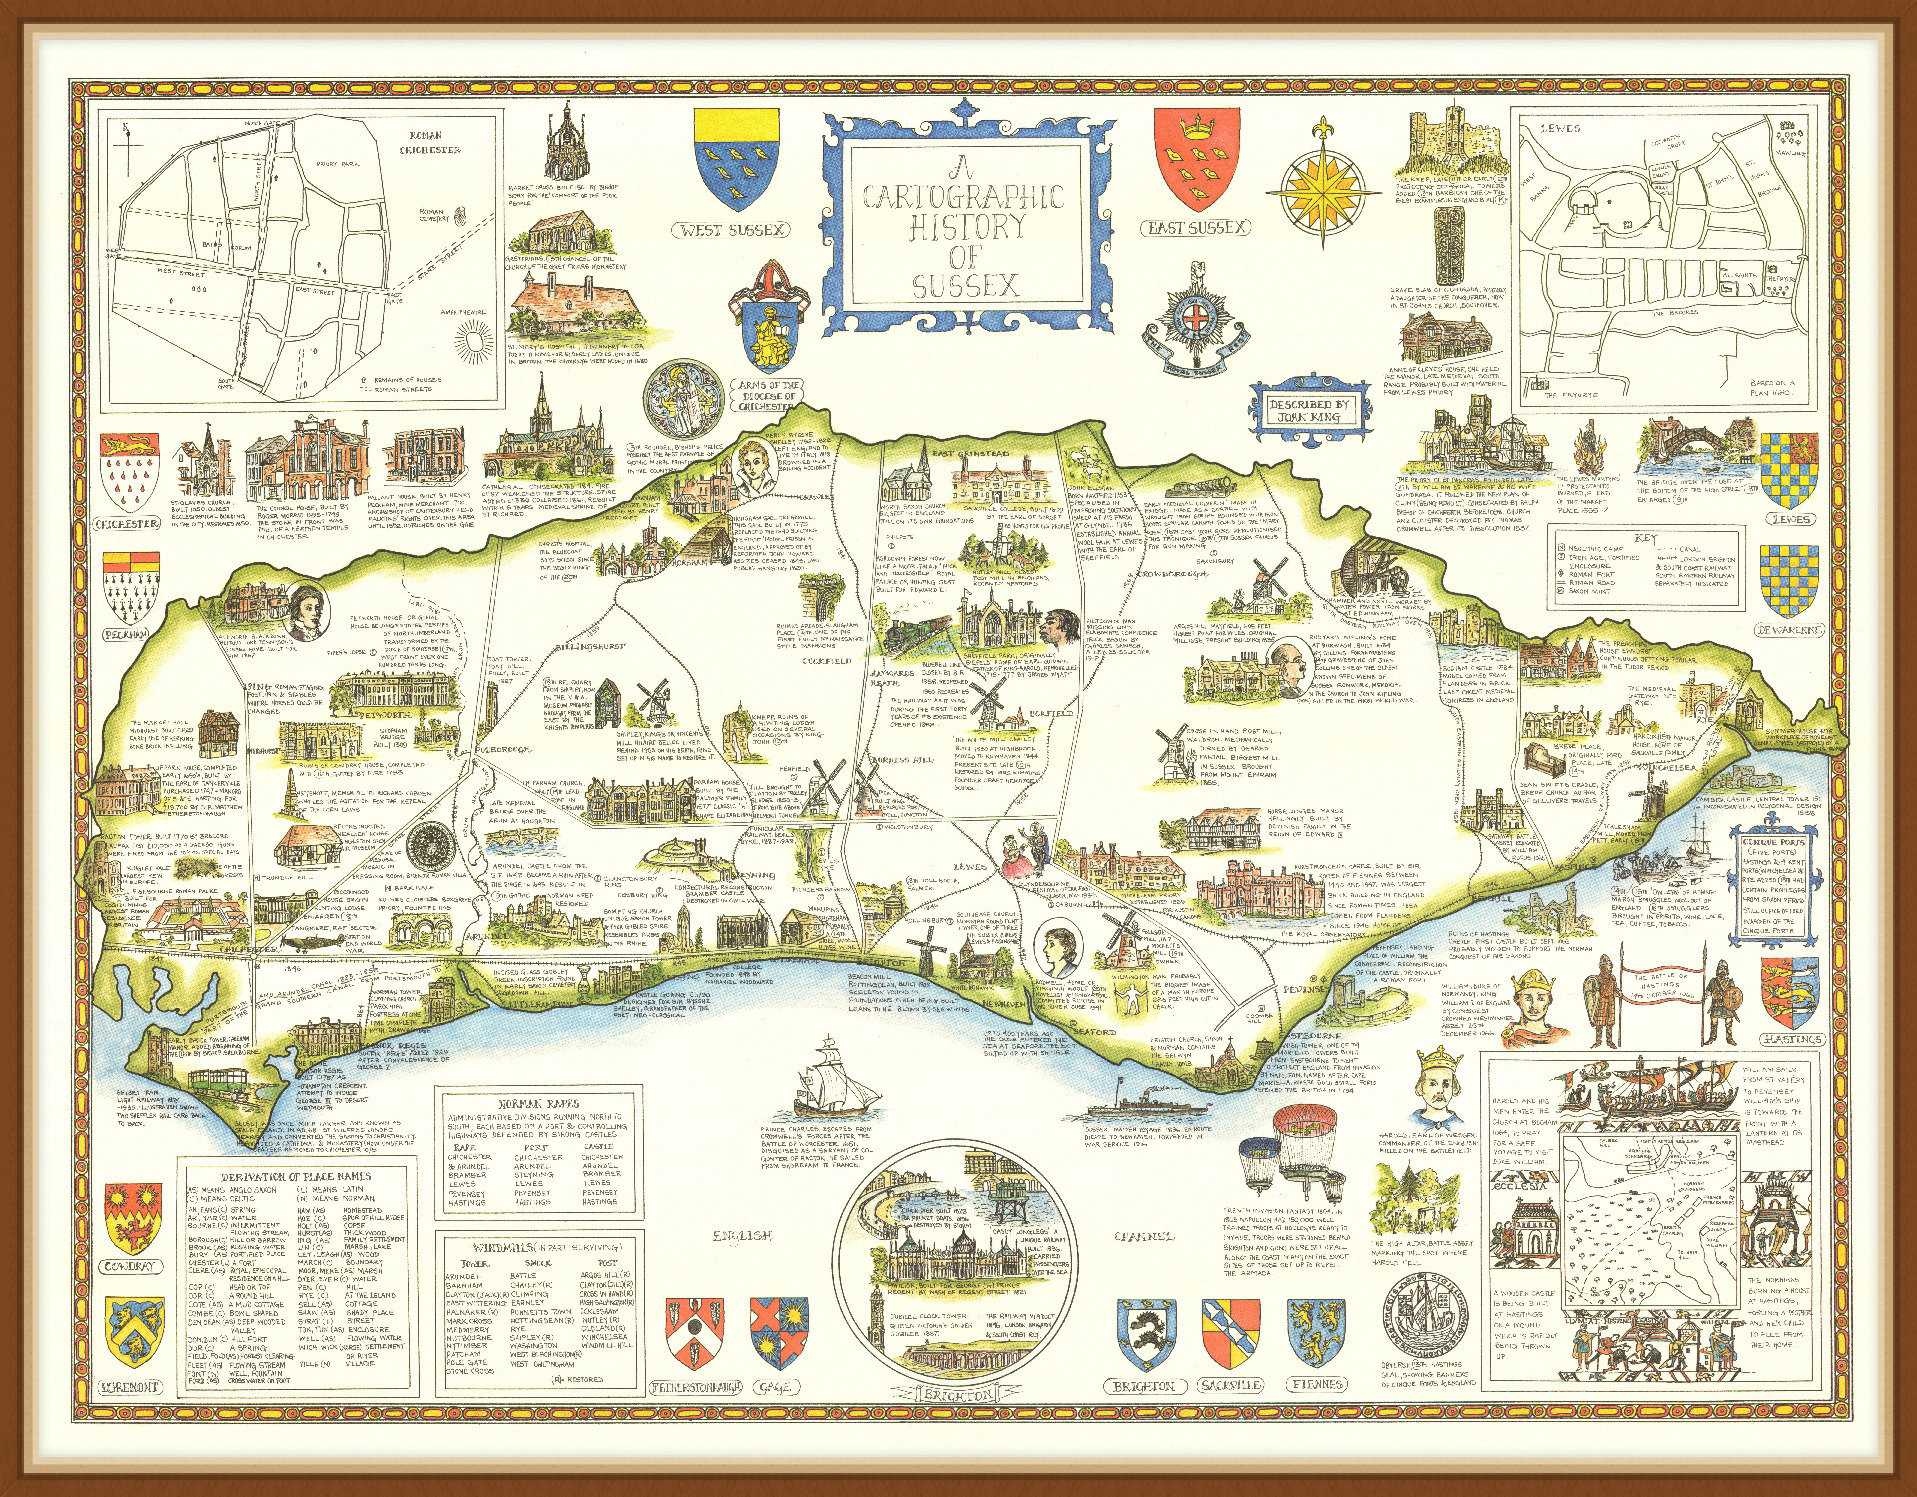 A Cartographic History of Sussex pic